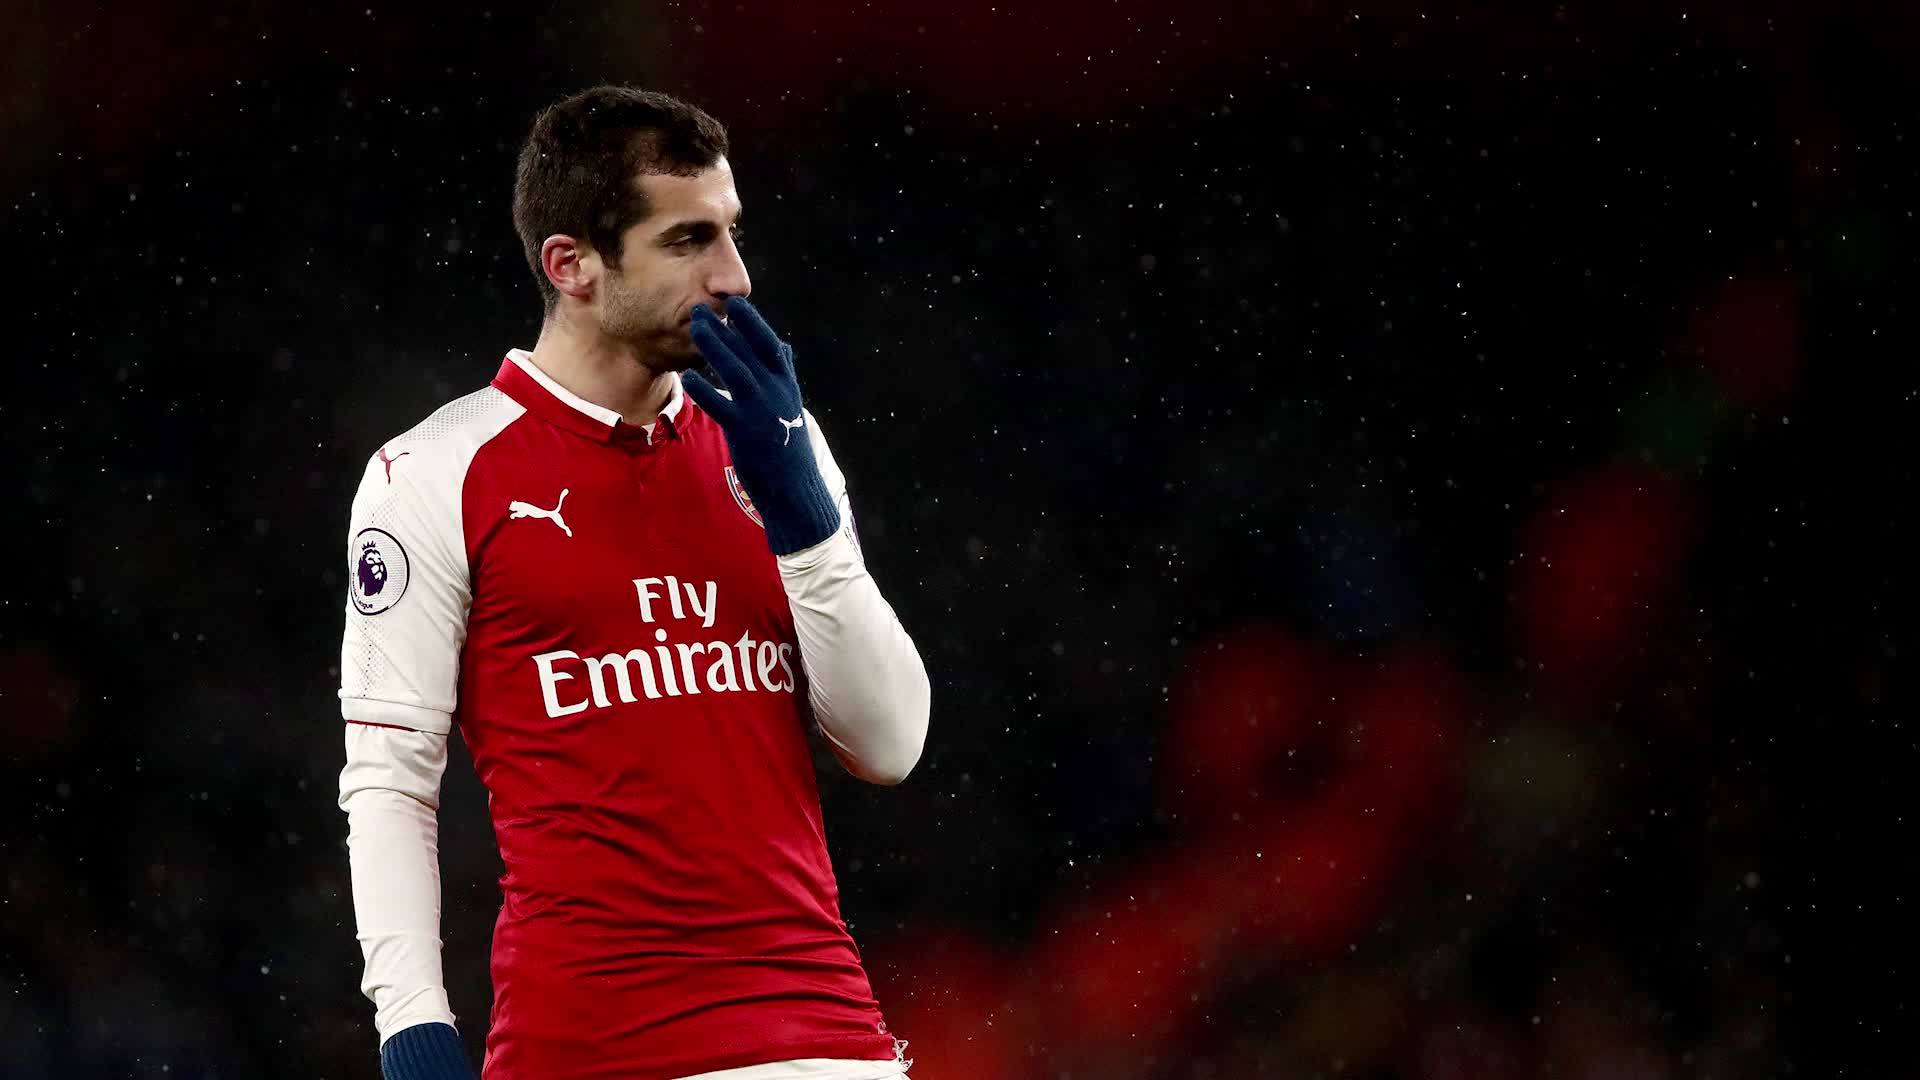 Why Arsenal's Henrikh Mkhitaryan may not be allowed to play at the Europa League final